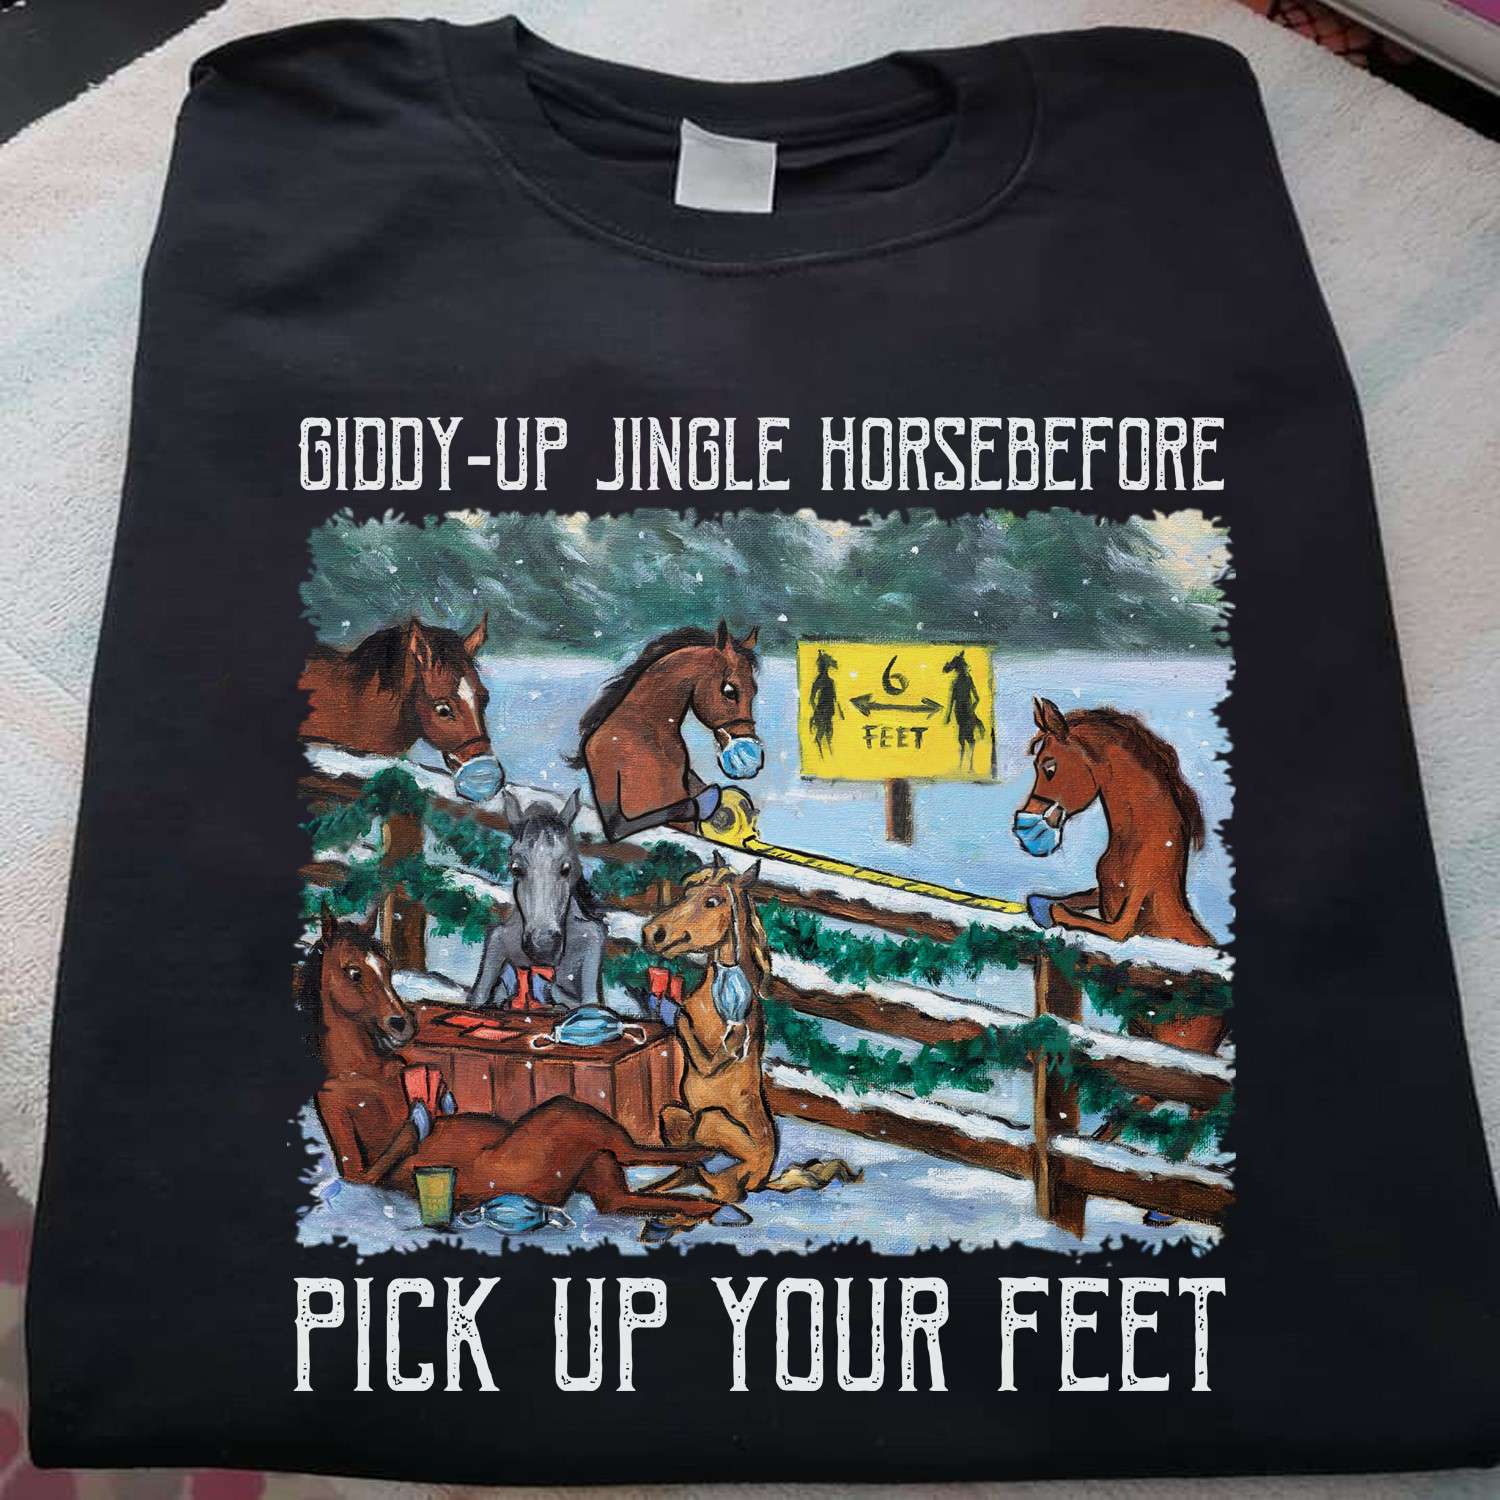 Giddy-up jingle horsebefore, pick up your feet - Christmas day gift, Horse during pandemic